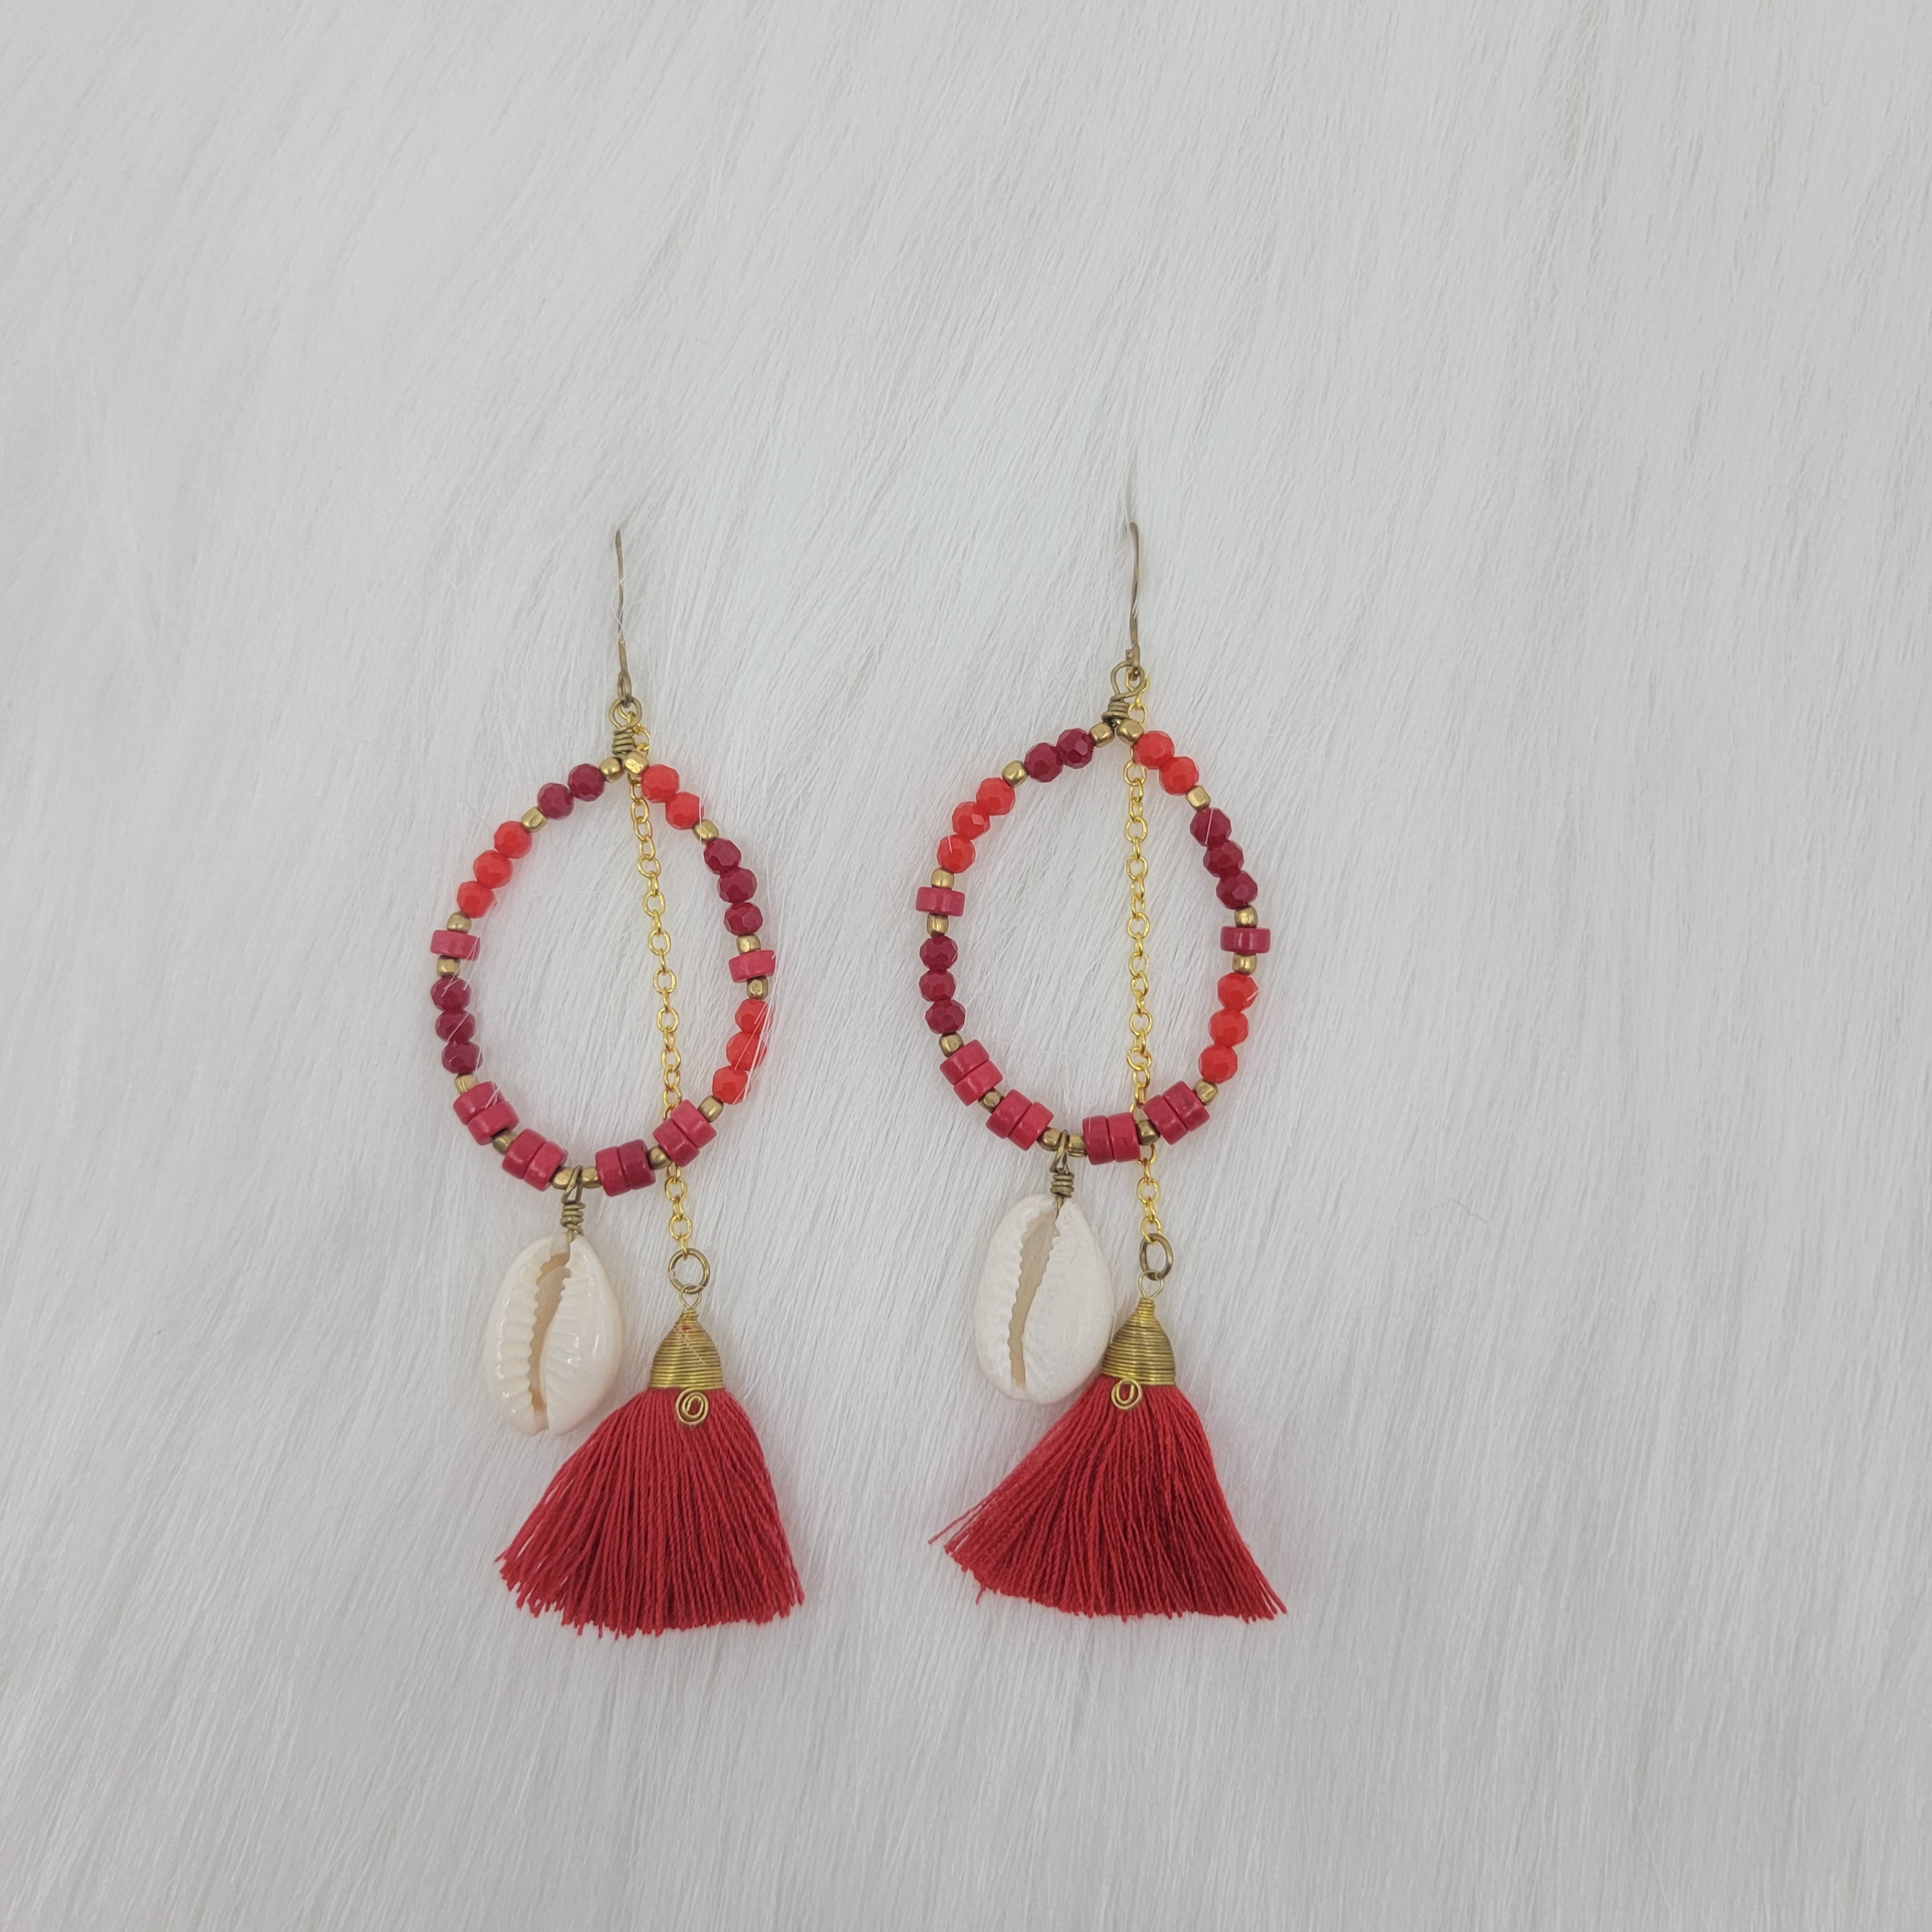 Crystal Beads With Tassels and Cowrie Shell